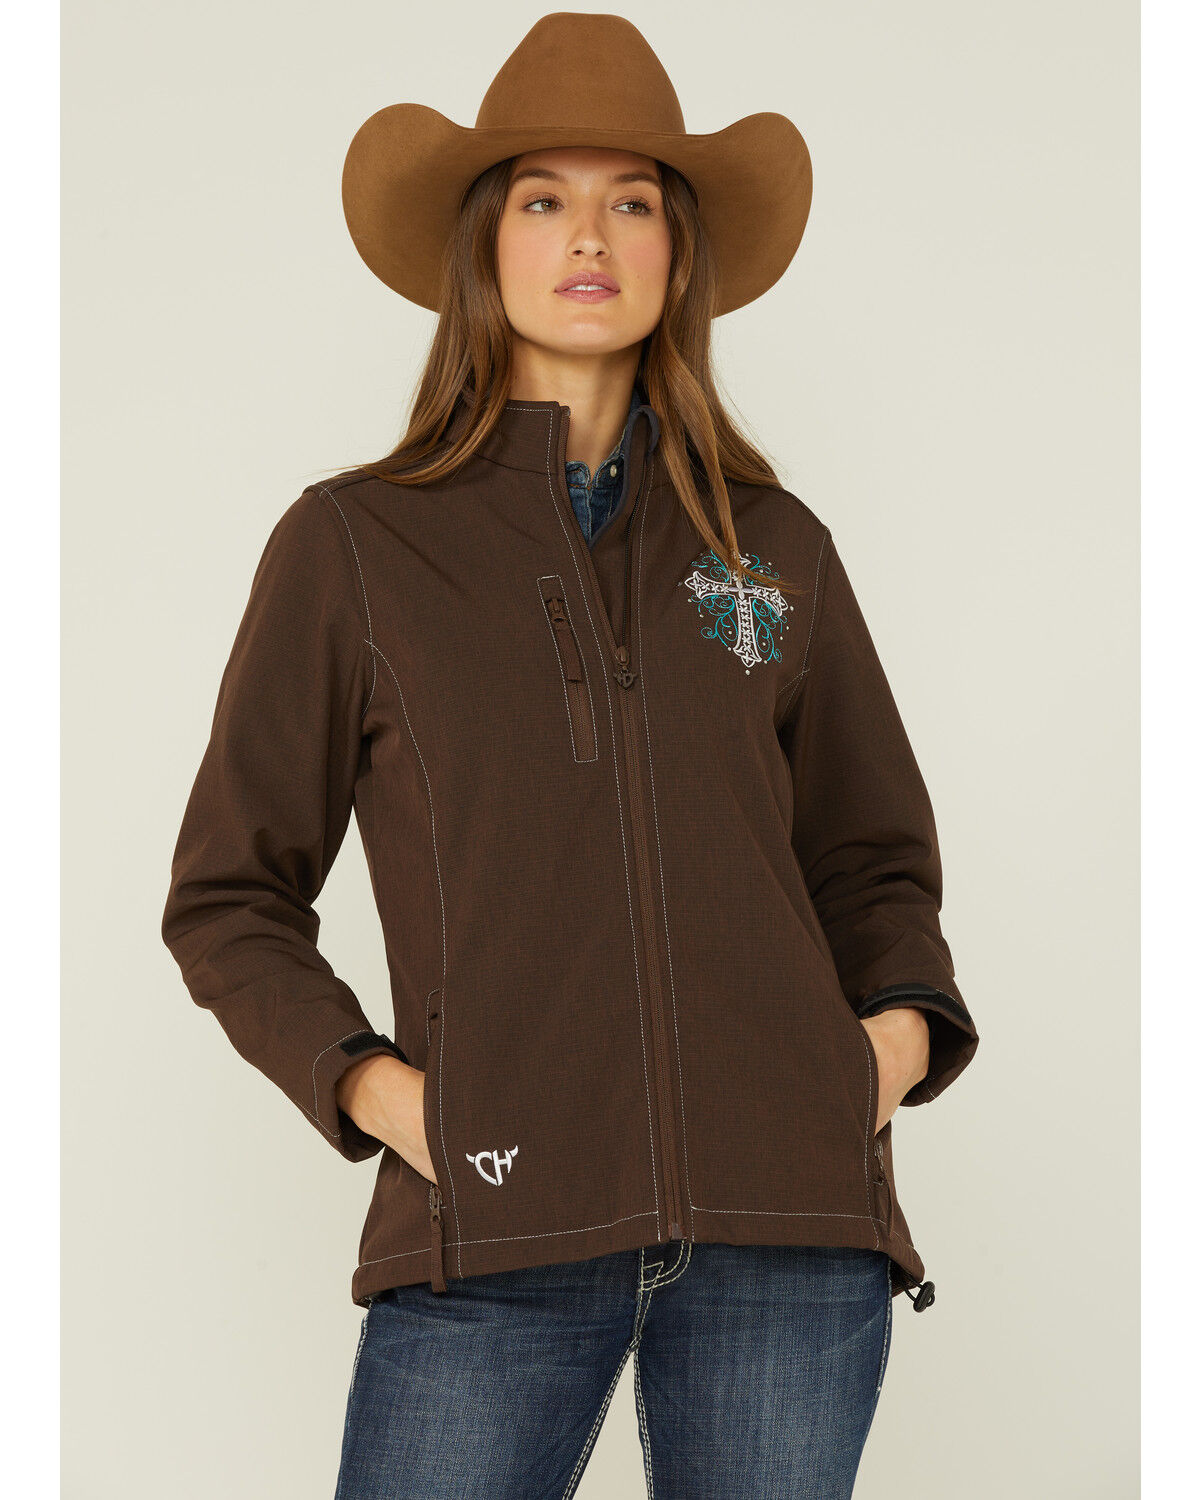 Cowgirl Hardware Girls' Brown Burnout Rodeo Rock Star Hooded Pullover 471223-660